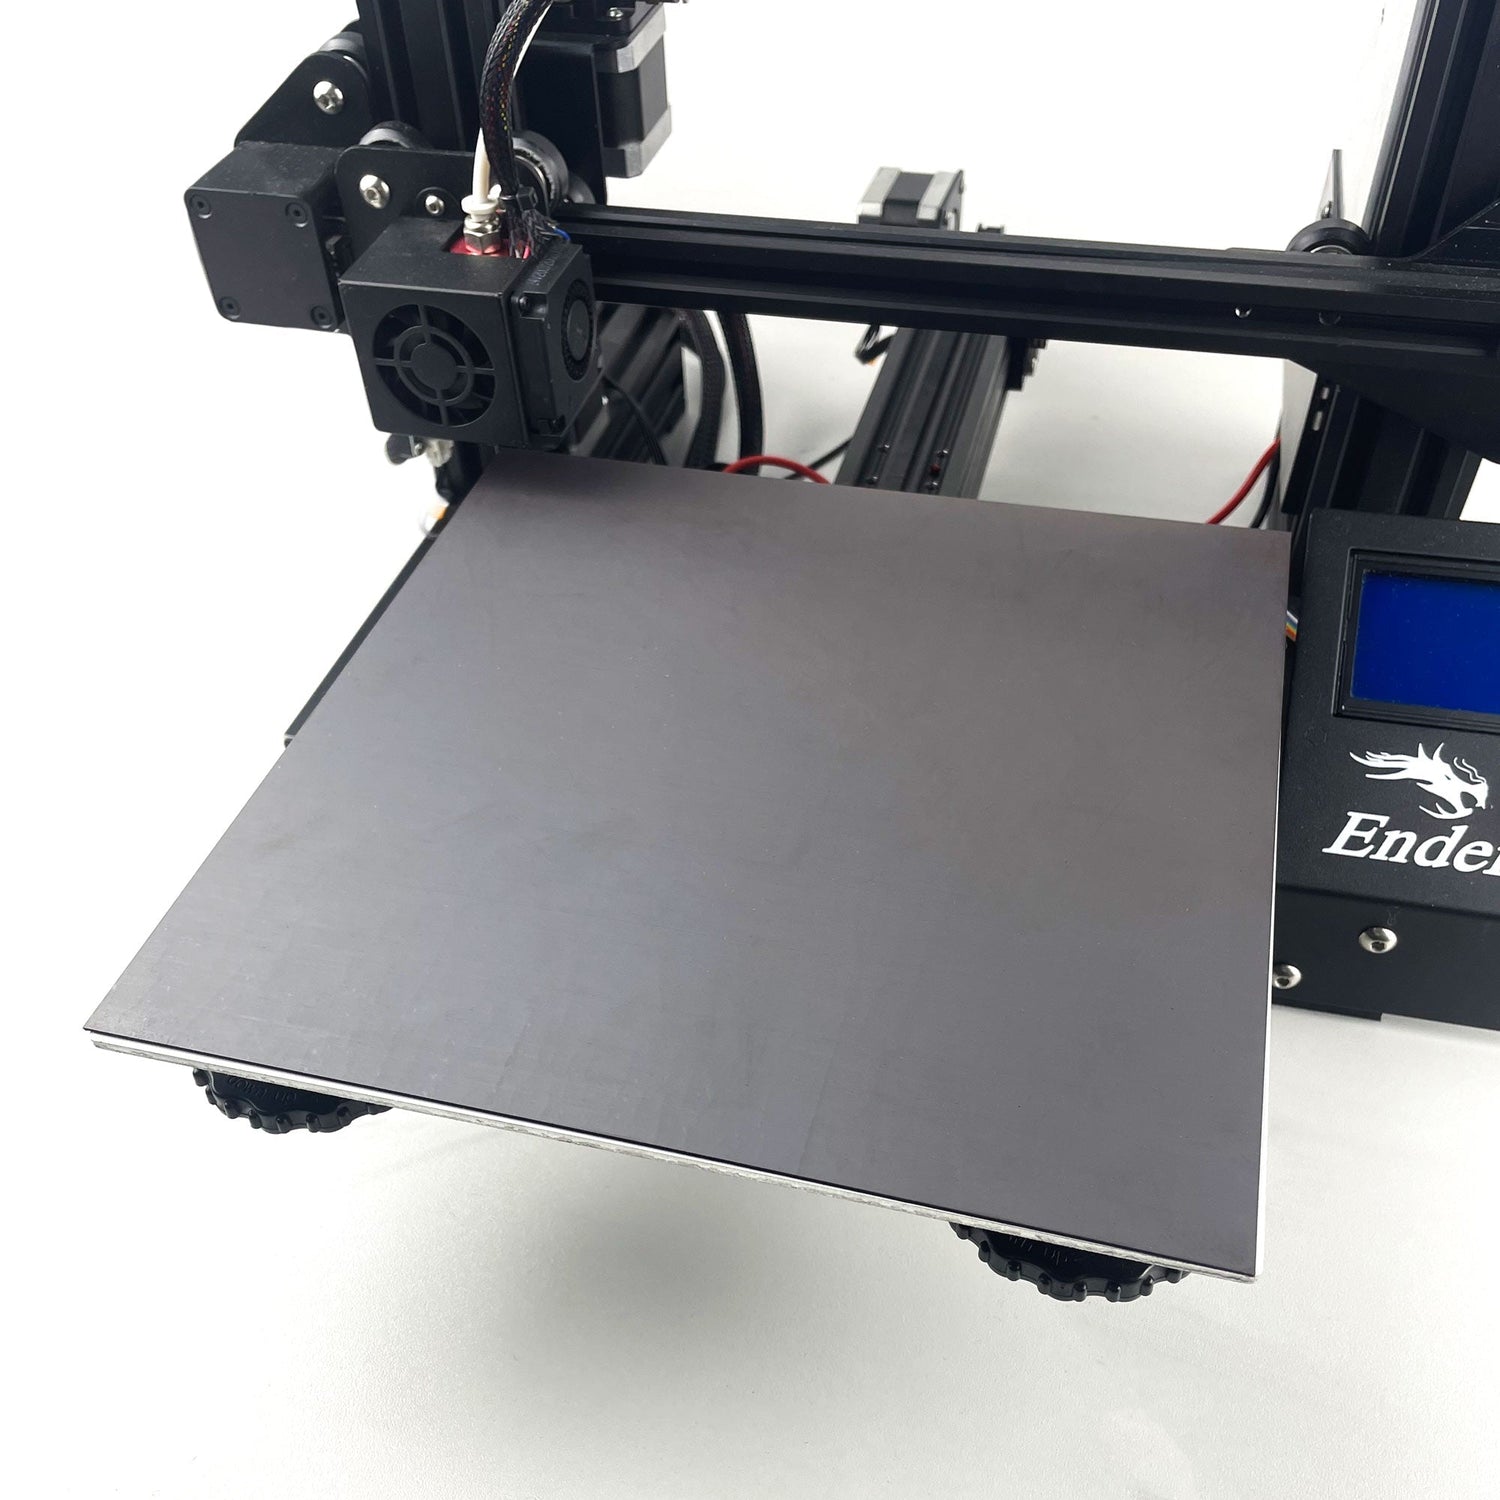 Strong Magnetic Sticker for 165x165 heatbed ⏱️ - Strong Magnetic Sticker for 165x165 heatbed ⏱️ - OSEQ